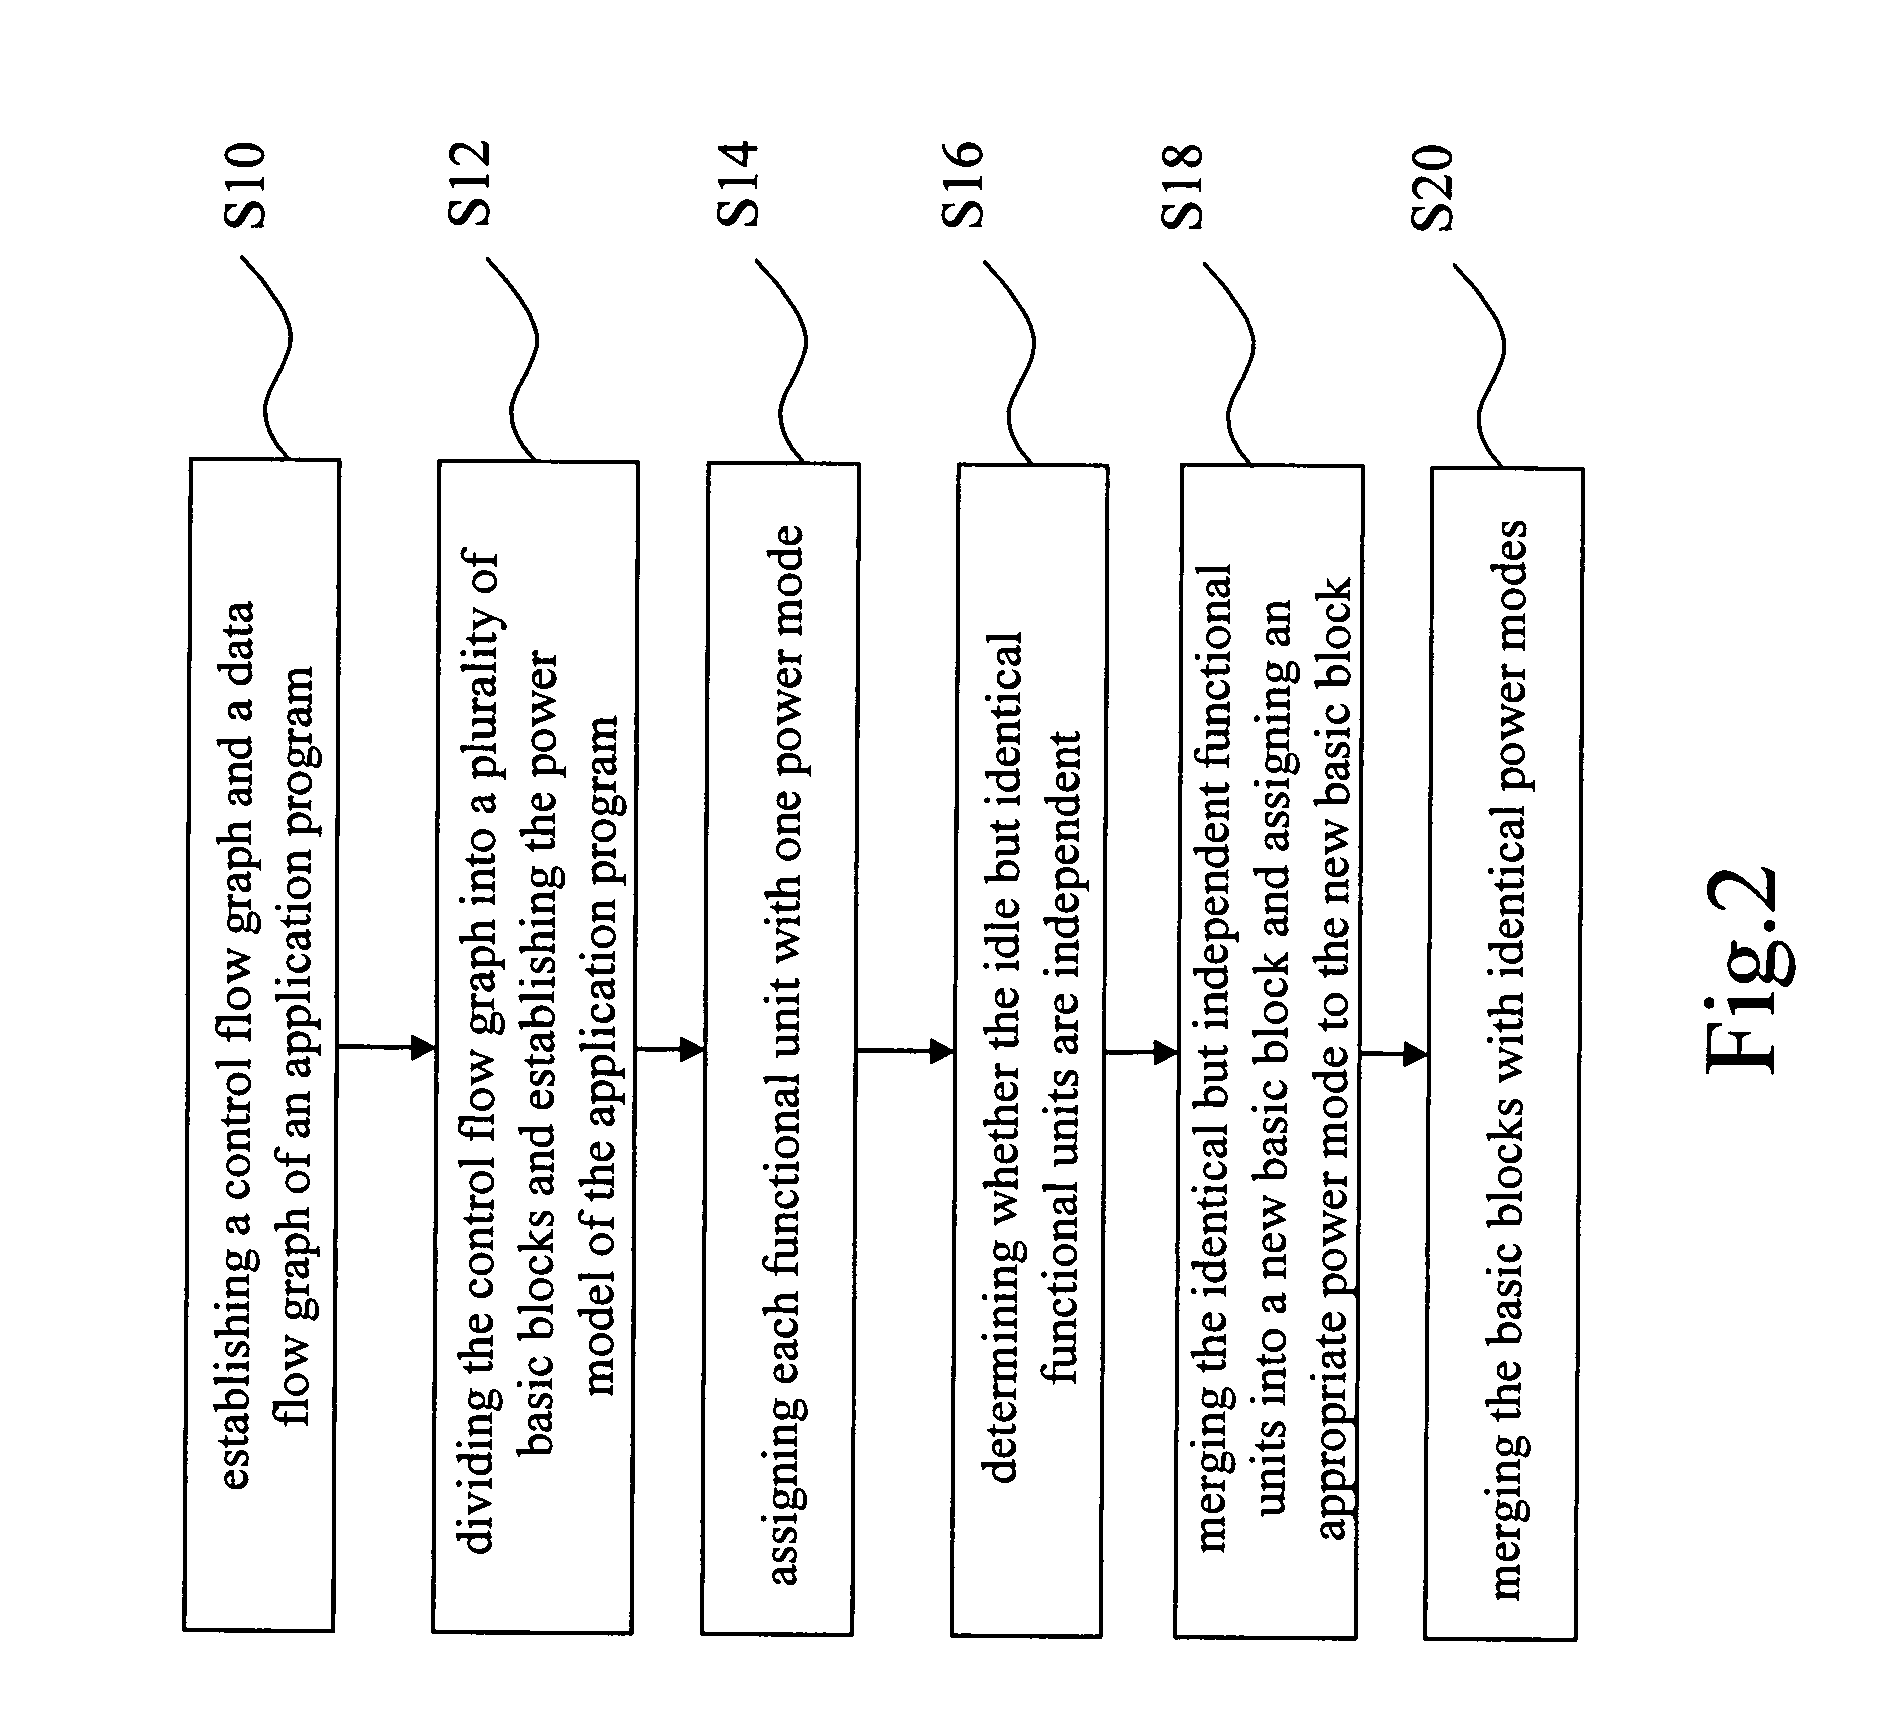 Power-aware compiling method